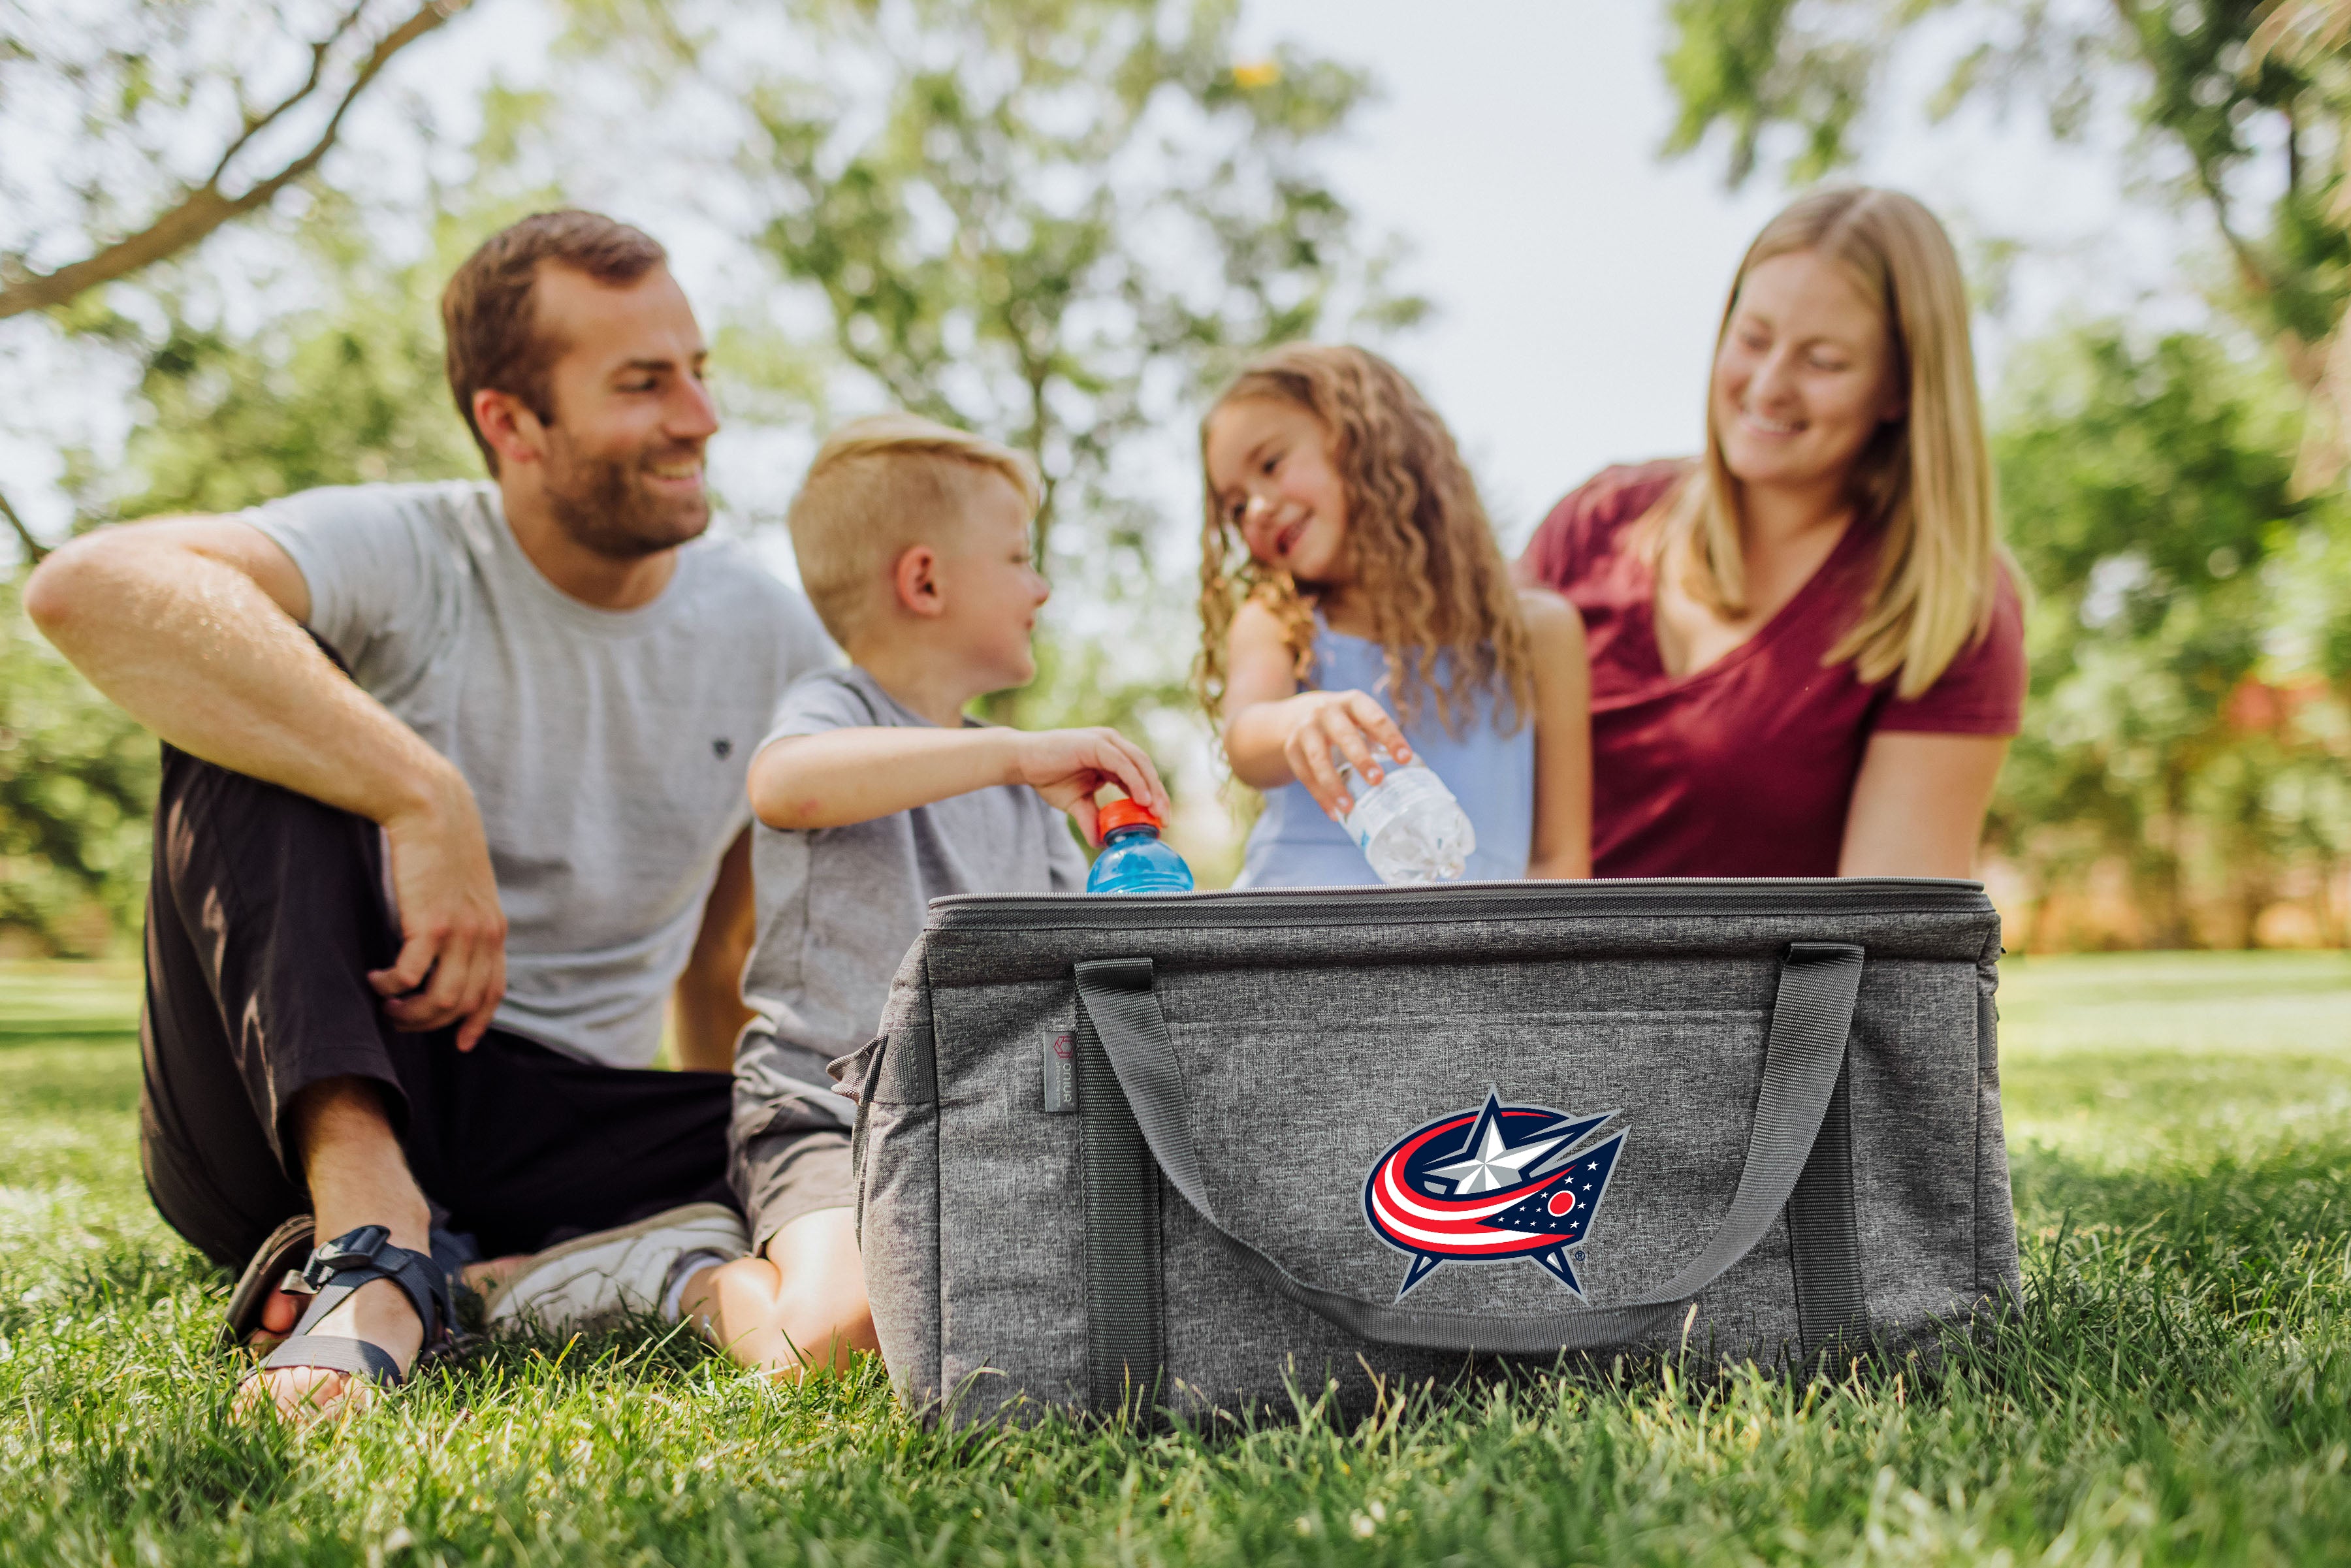 Columbus Blue Jackets - 64 Can Collapsible Cooler